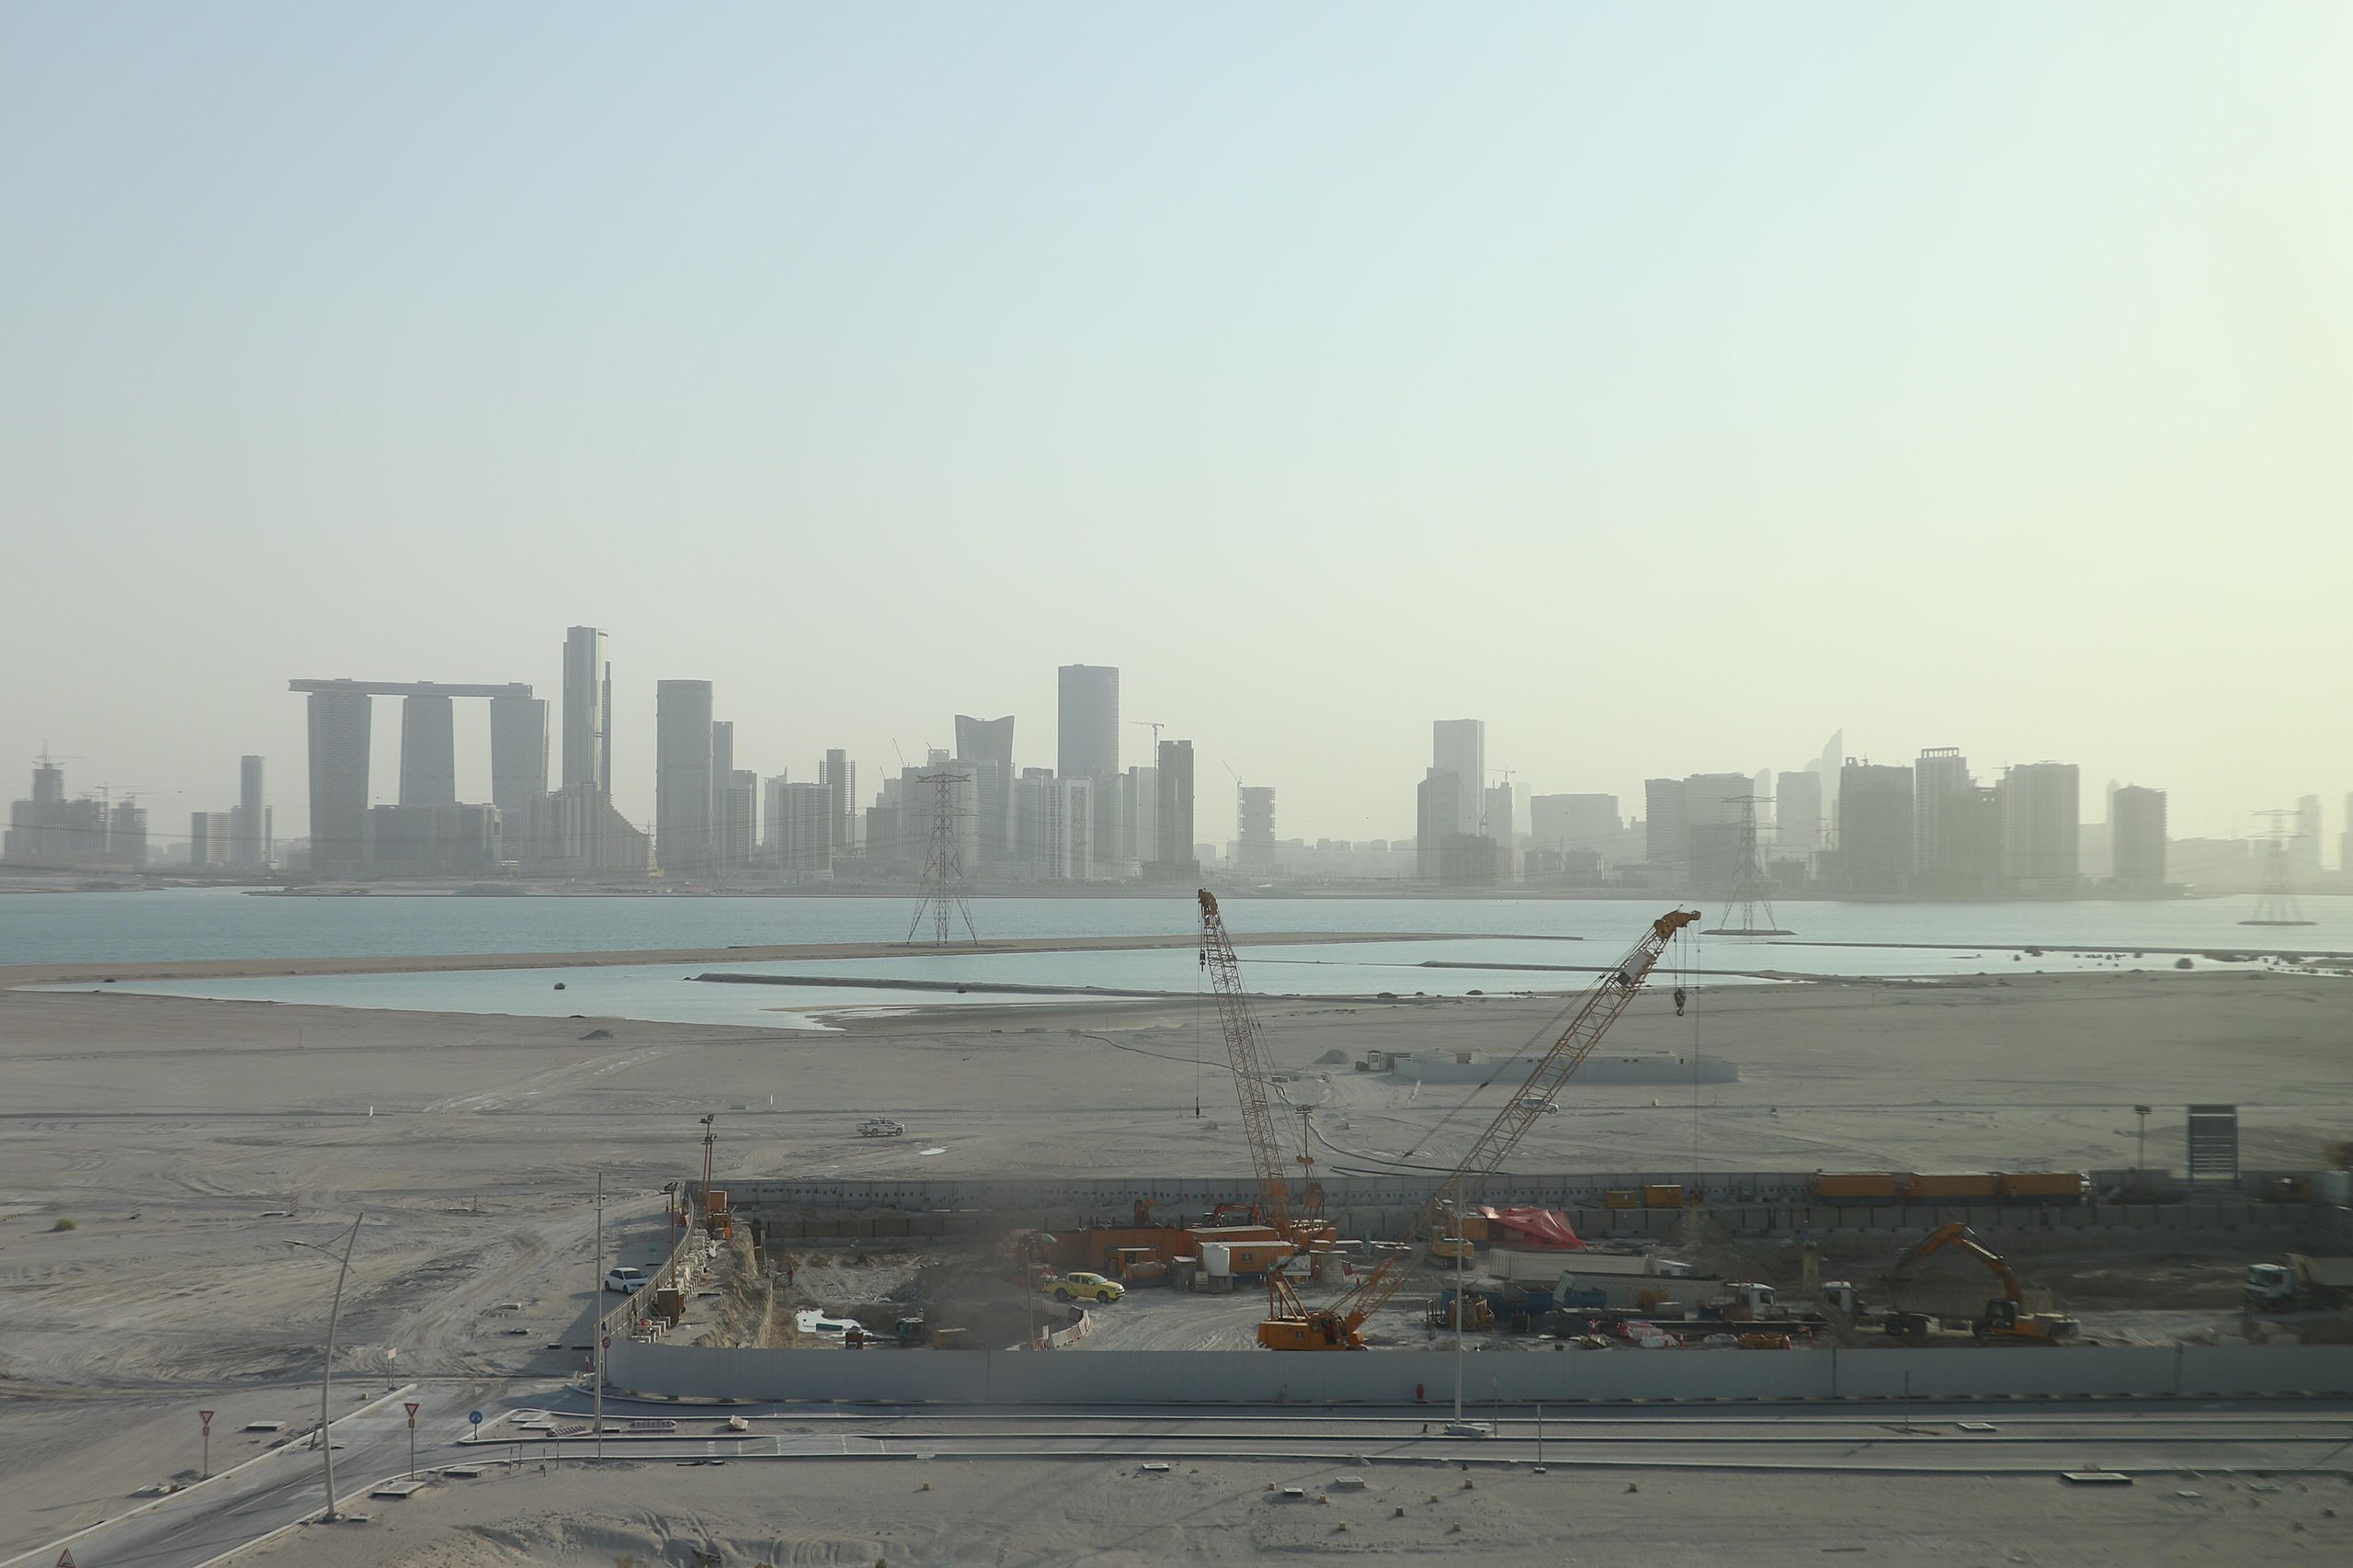 Environment Agency – Abu Dhabi implements executive regulation to improve marine water quality